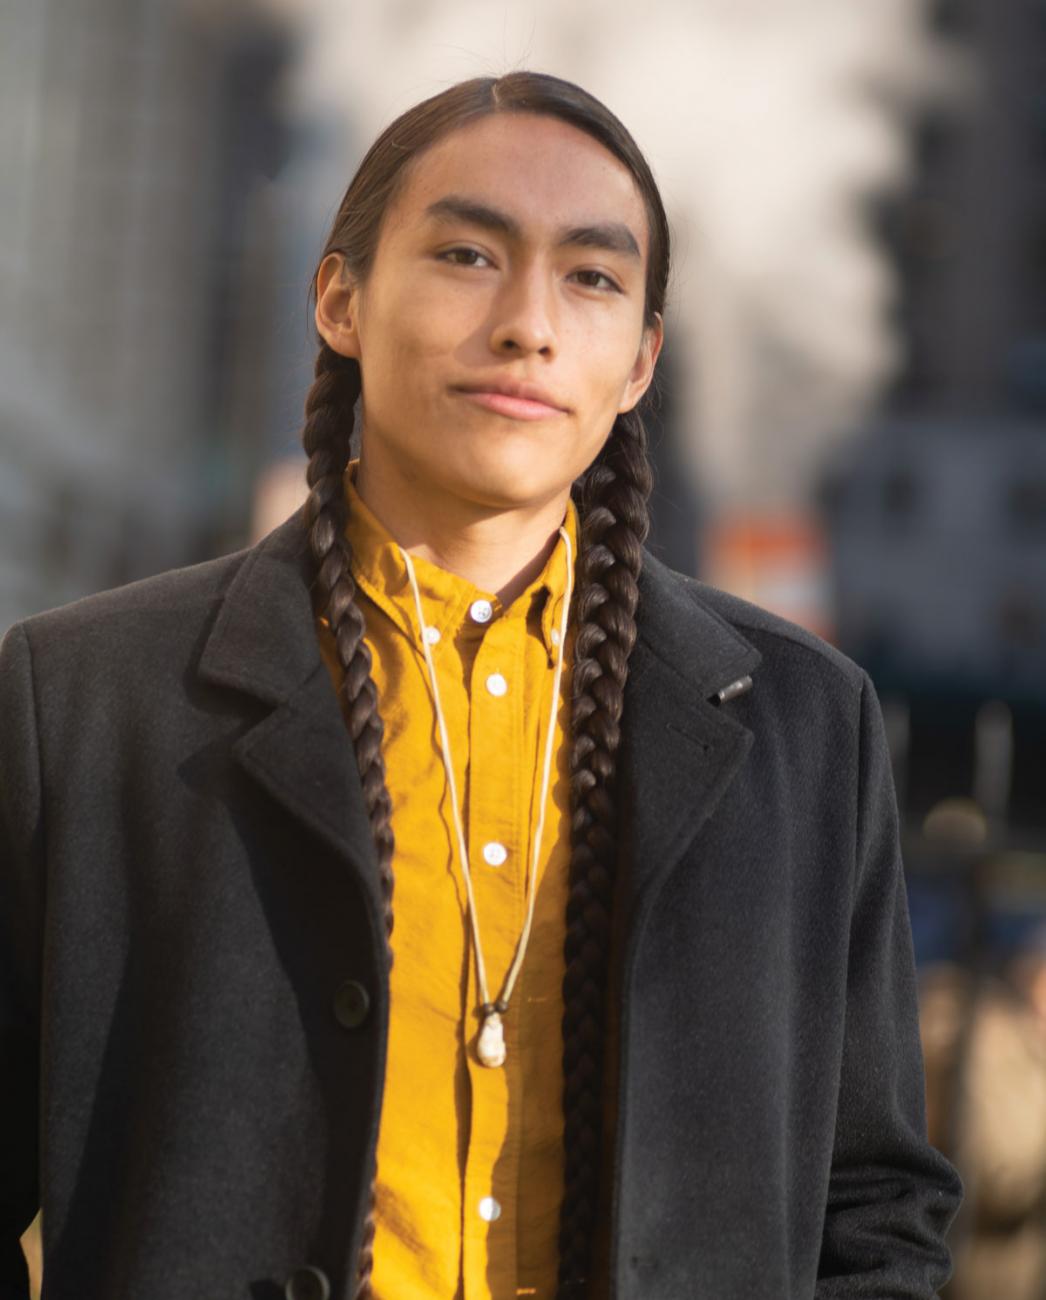 True Native New Yorkers: Connecting to Community and Each Other, Even ...